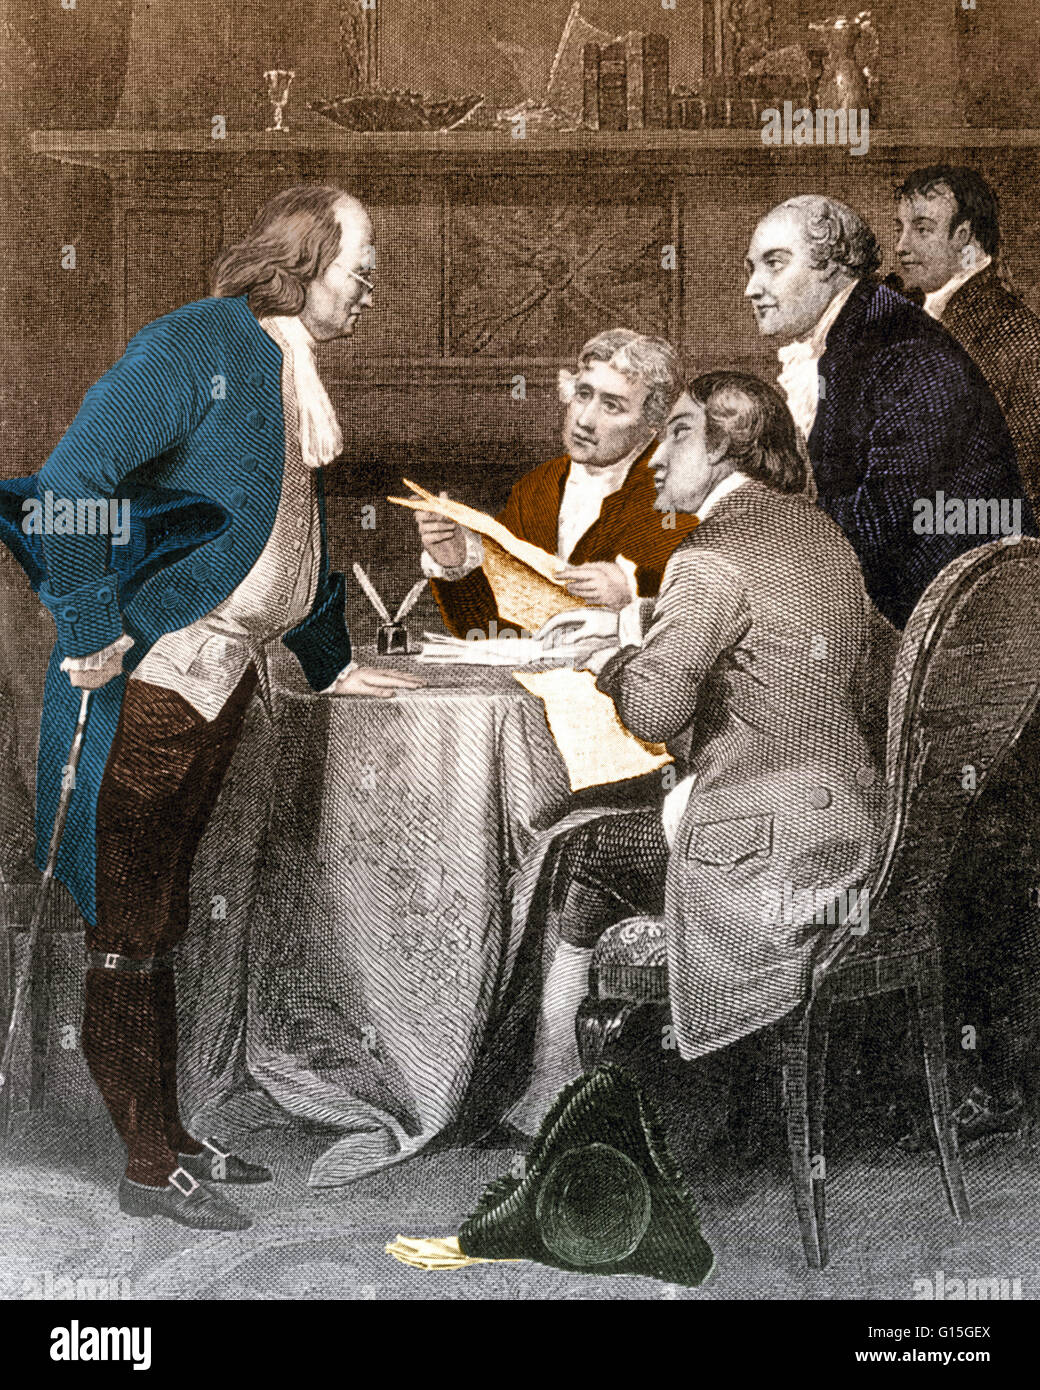 Meeting of the Declaration of Independence Committee. Pictured are Thomas Jefferson, Roger Sherman, Benjamin Franklin, Robert Livingston, and John Adams drafting the Declaration of Independence in June 1776. Stock Photo